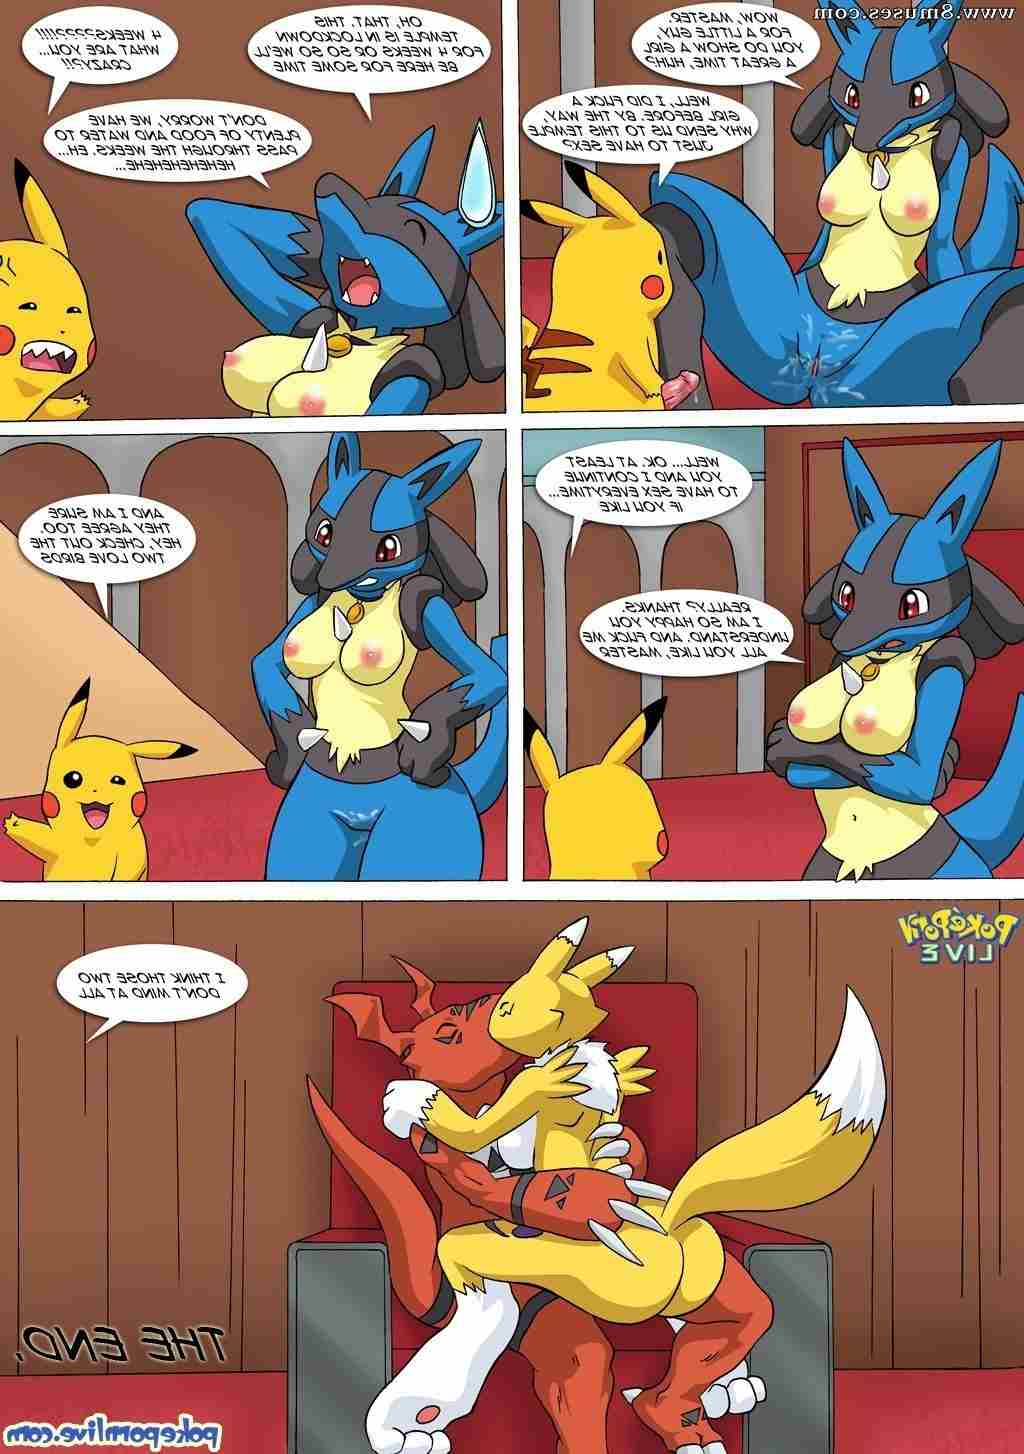 PokepornLive-Comics/Girls-come-to-play Girls_come_to_play__8muses_-_Sex_and_Porn_Comics_10.jpg